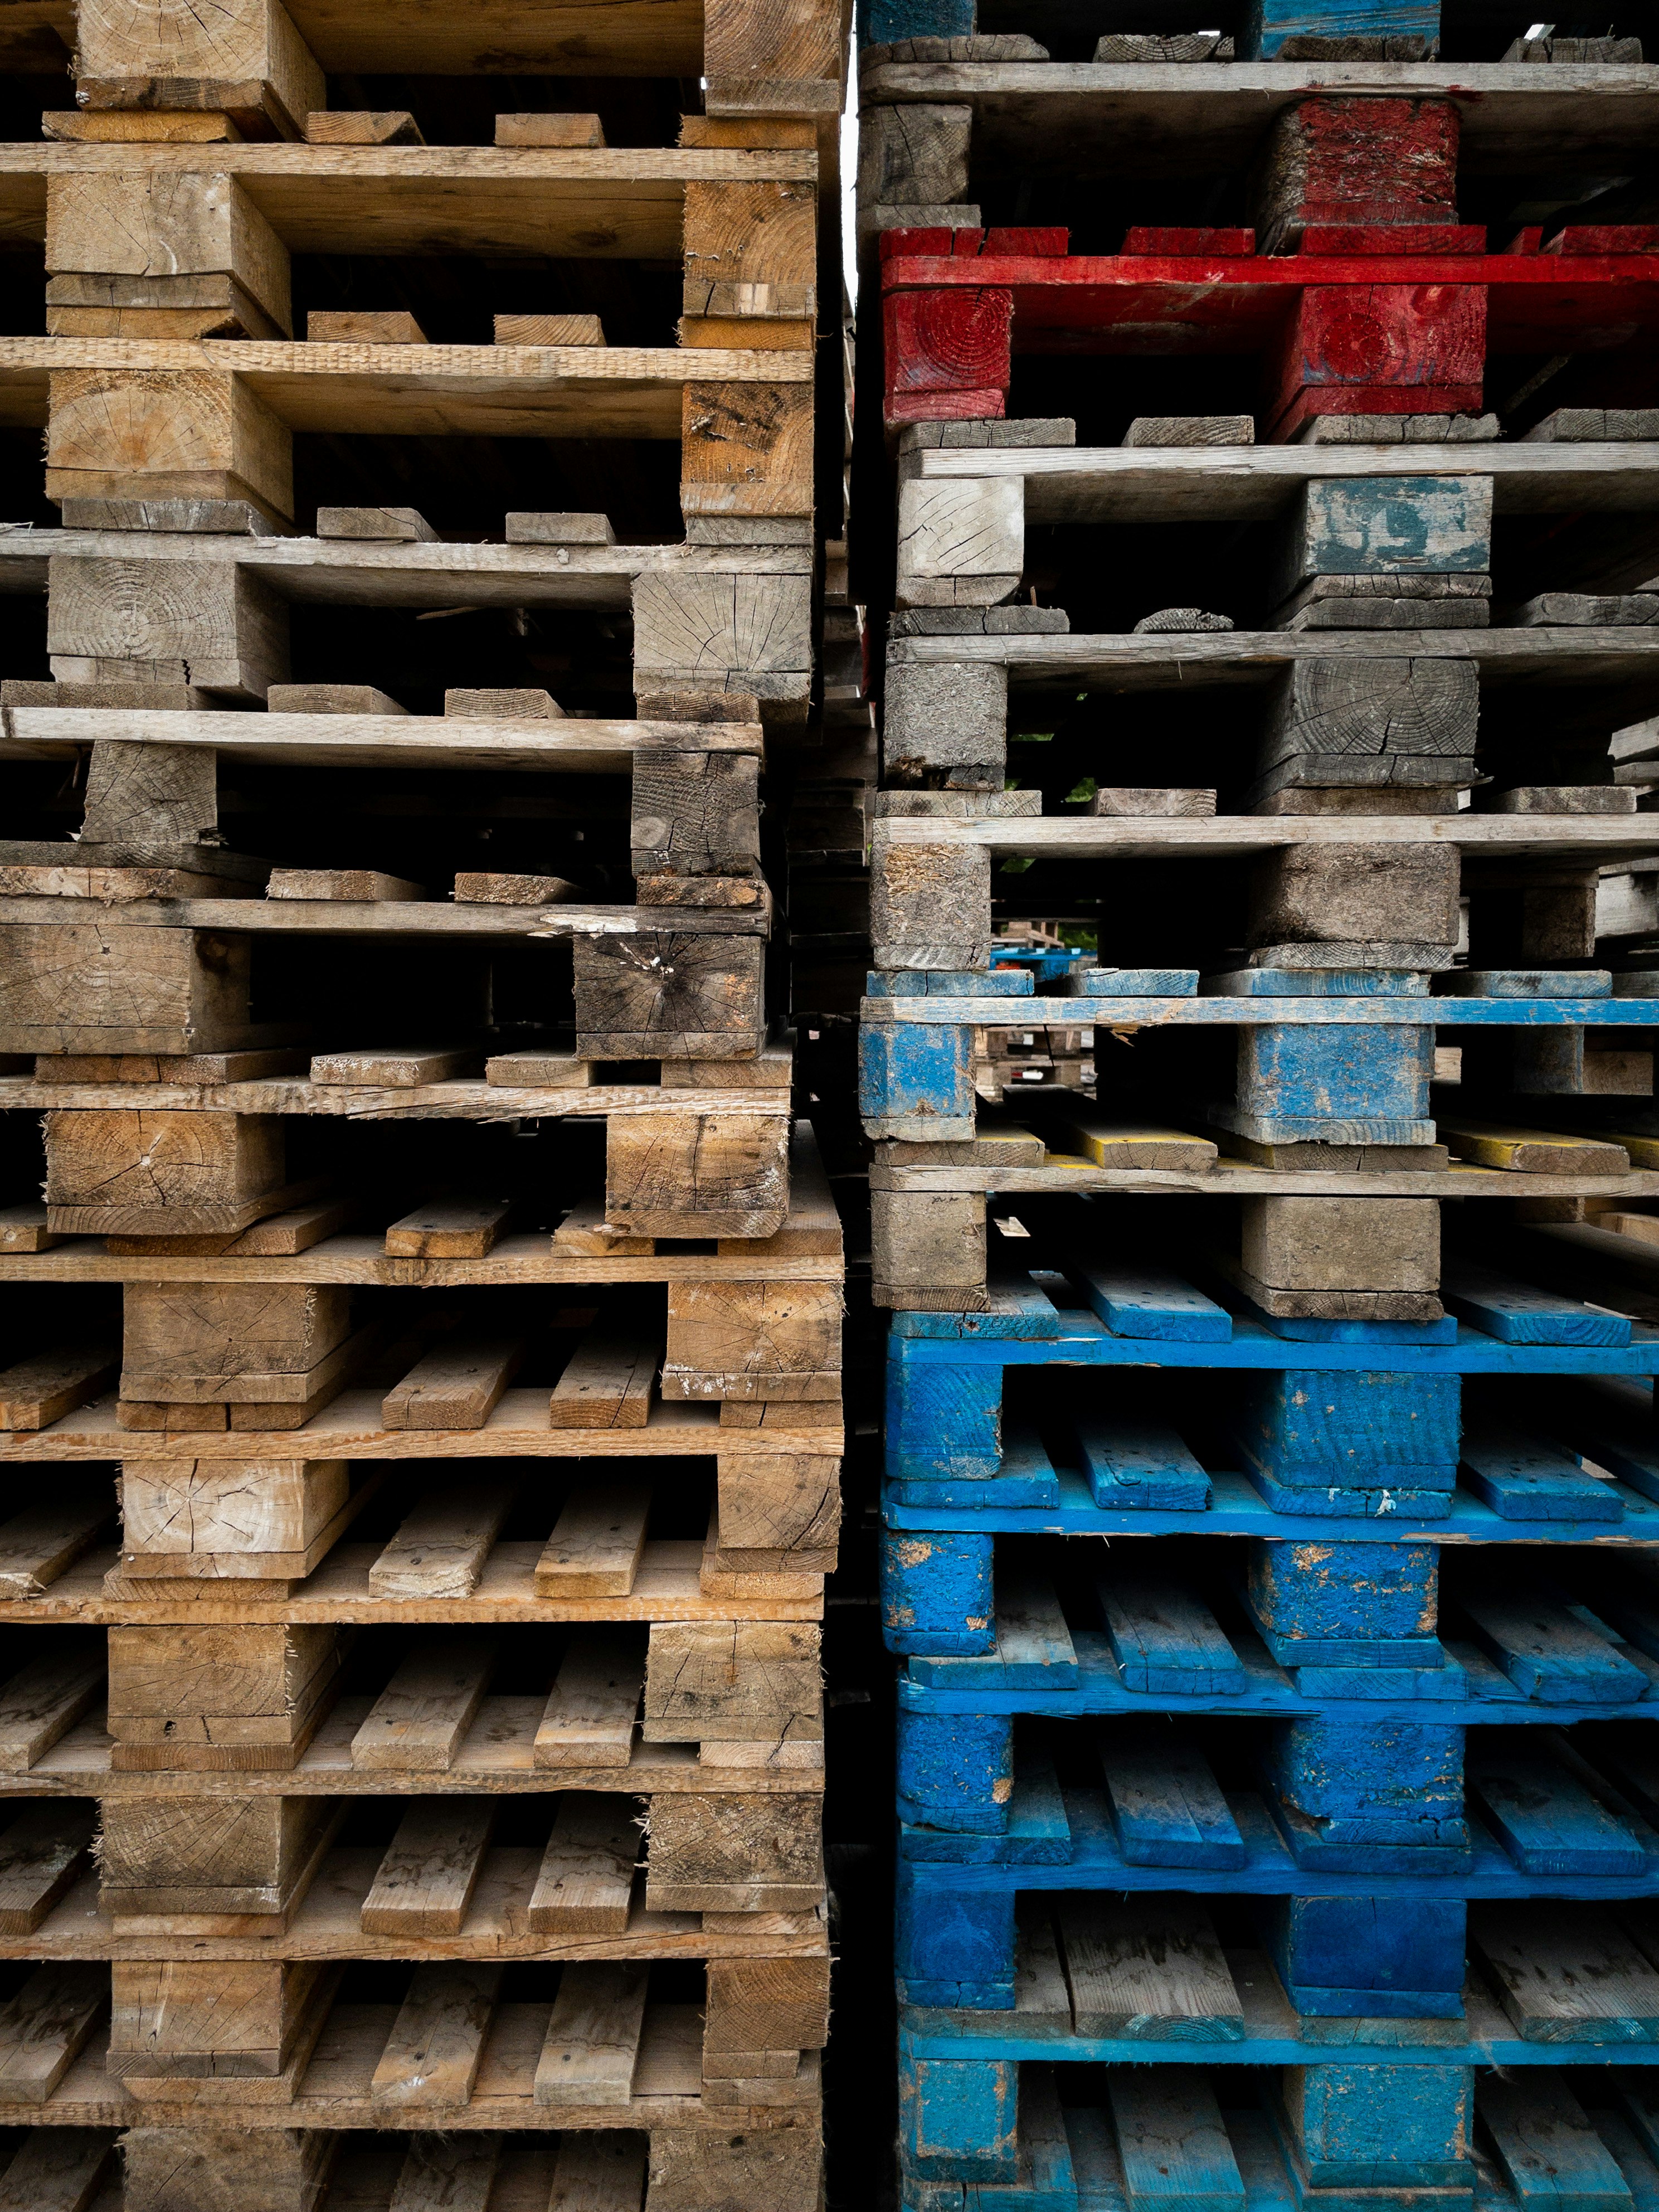 brown wooden crates with red and blue plastic crates